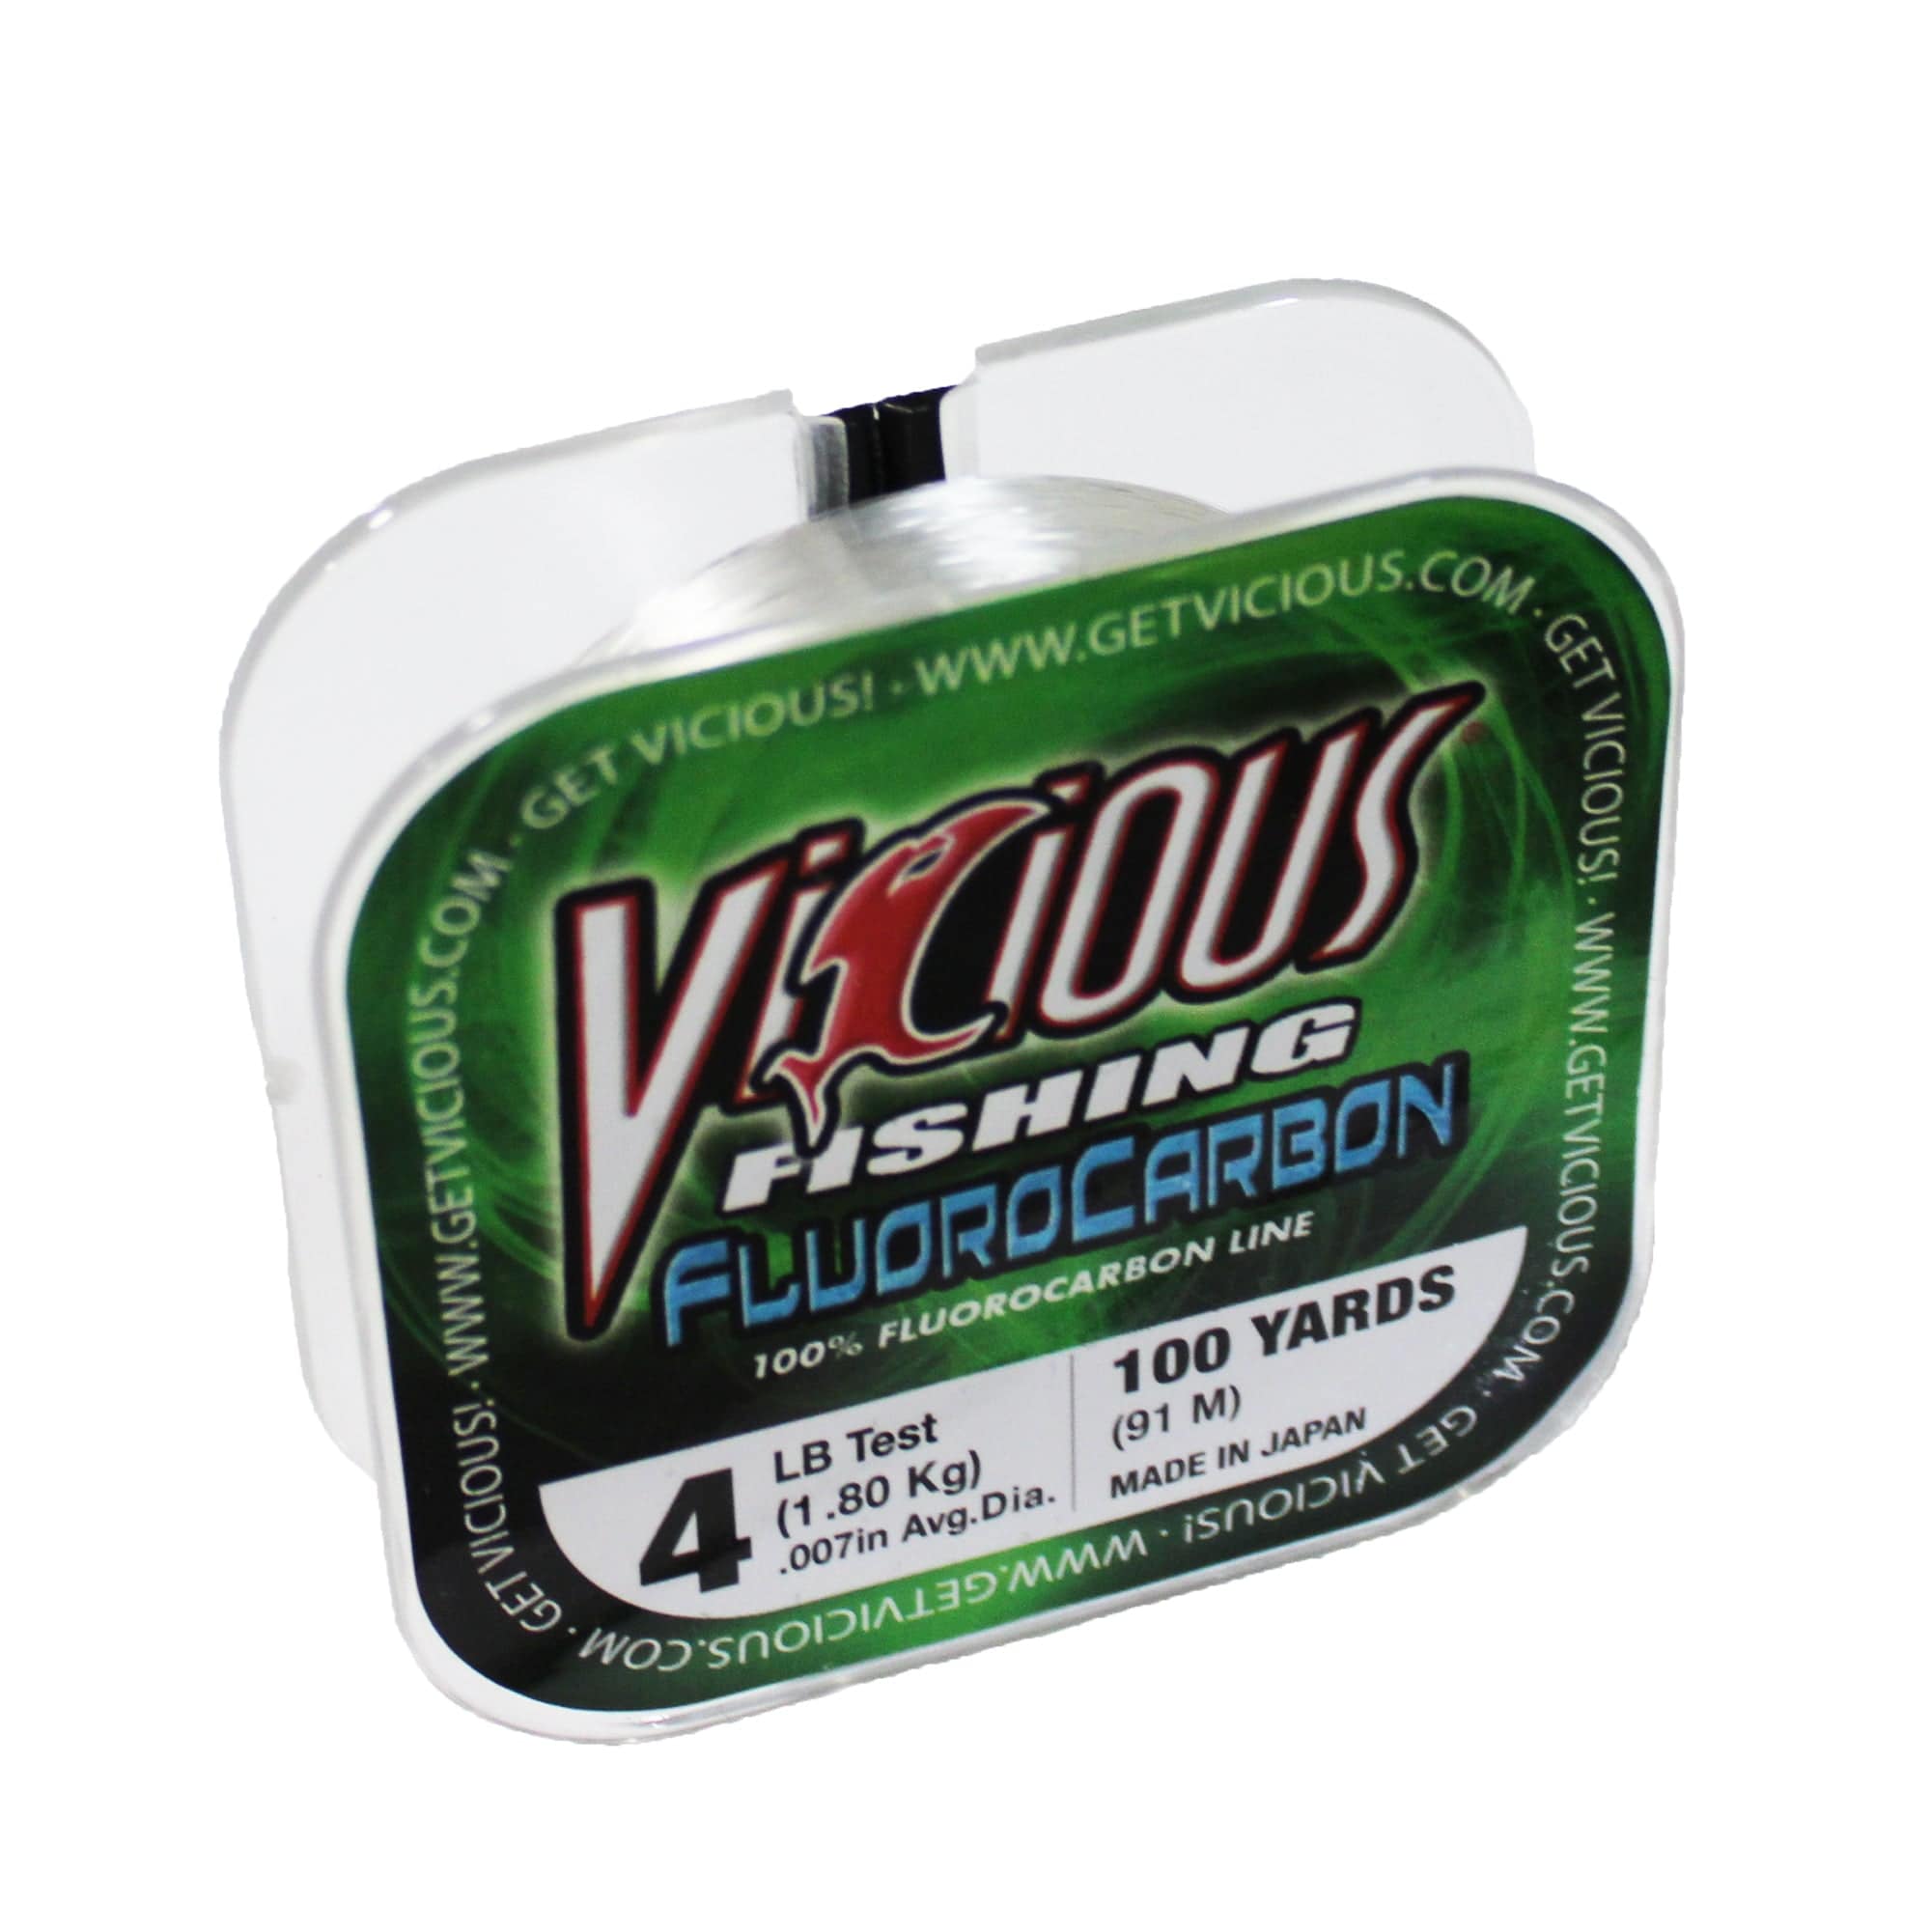 Vicious PFLO Fluorocarbon Fishing Line, 100 Yards - Clear